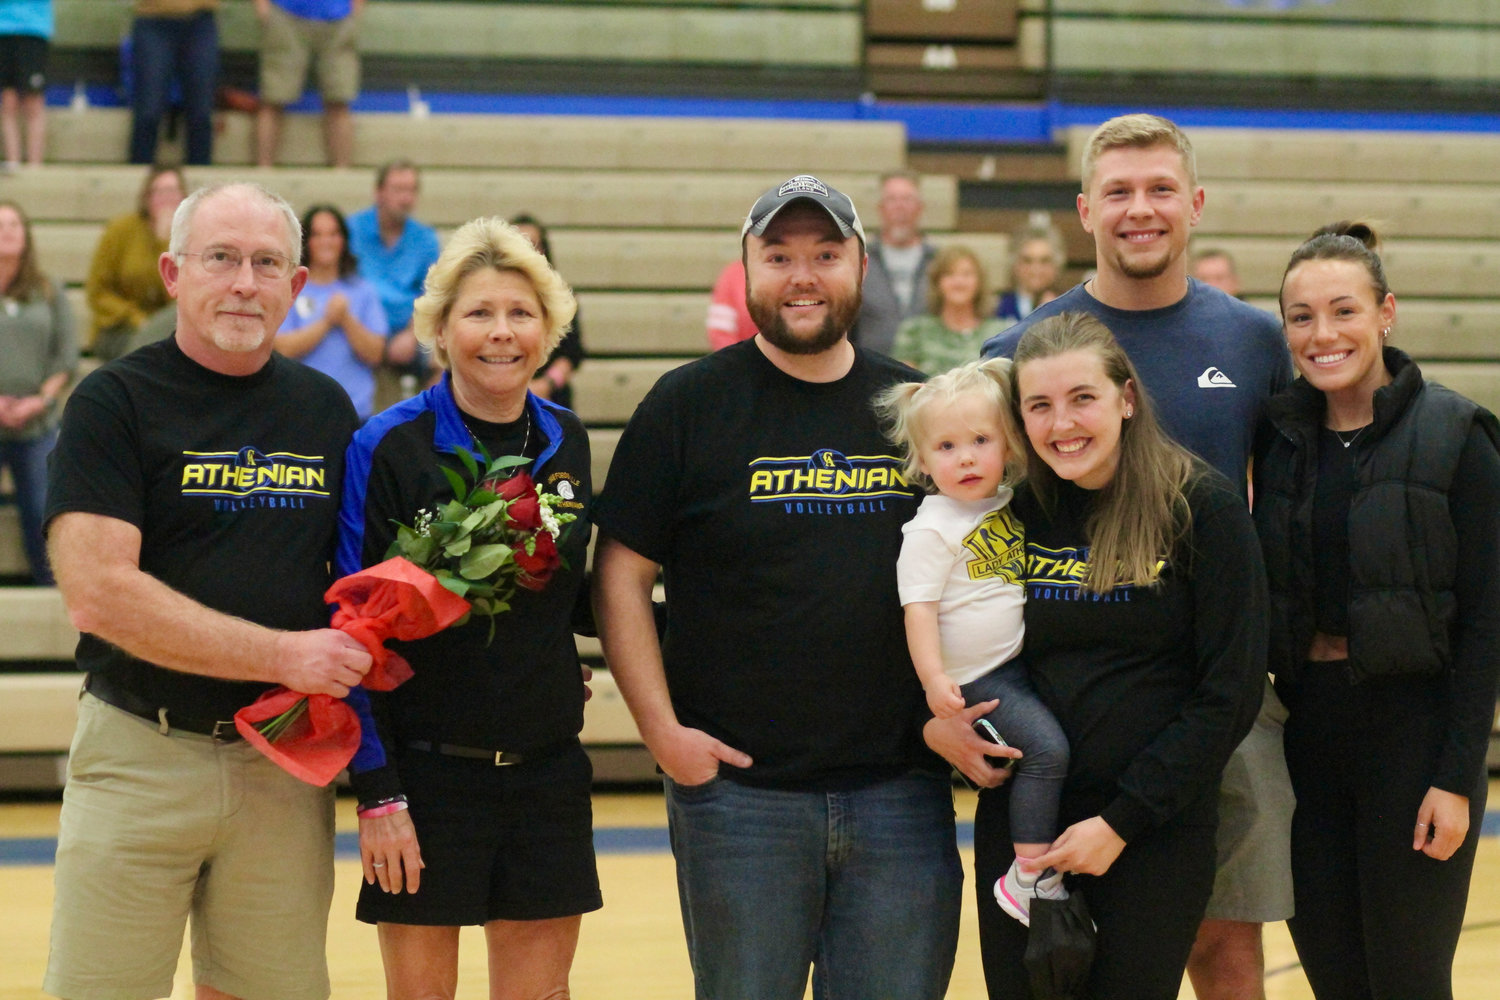 Crawfordsville volleyball coach Kelly Johnson is joined by her family at center court as she’s honored for her 39 years of dedication and service to the Athenian program.